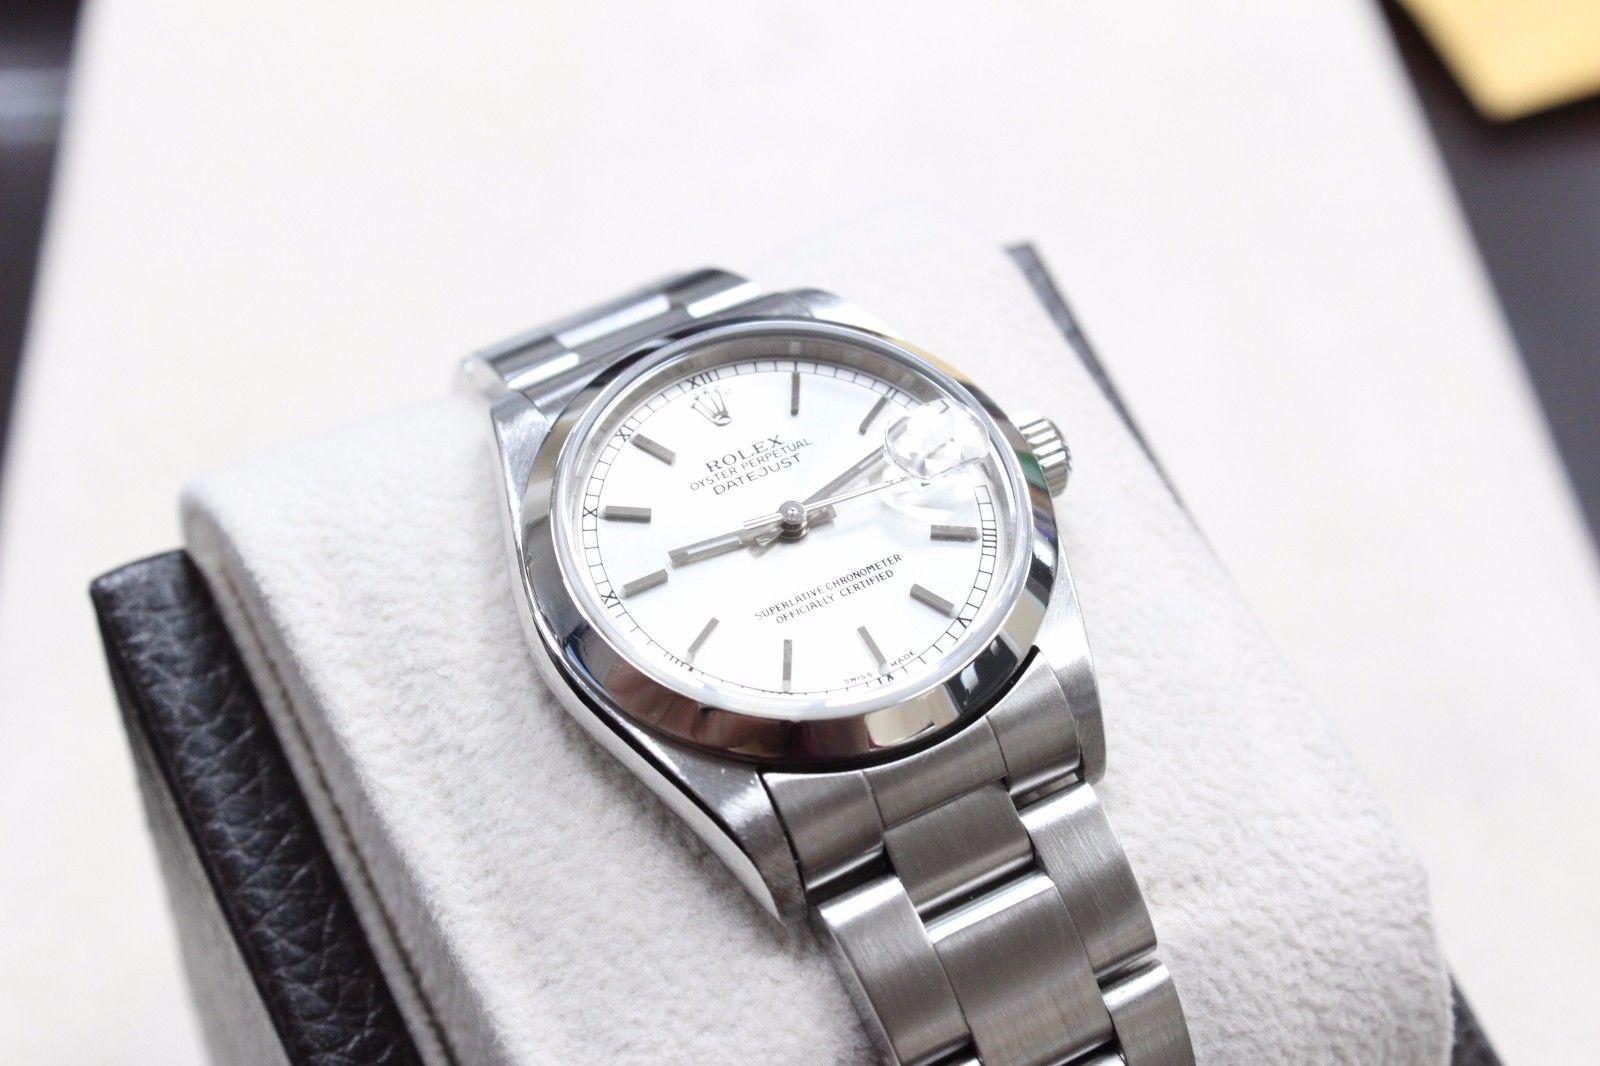 Style Number: 979025

Serial: A979***

Model: Datejust

Case Material: Stainless Steel 

Band: Stainless Steel

Bezel: Stainless Steel 

Dial: Silver Dial 

Face: Sapphire Crystal

Case Size: 31mm

Includes: 

-Rolex Box & Papers

-Certified